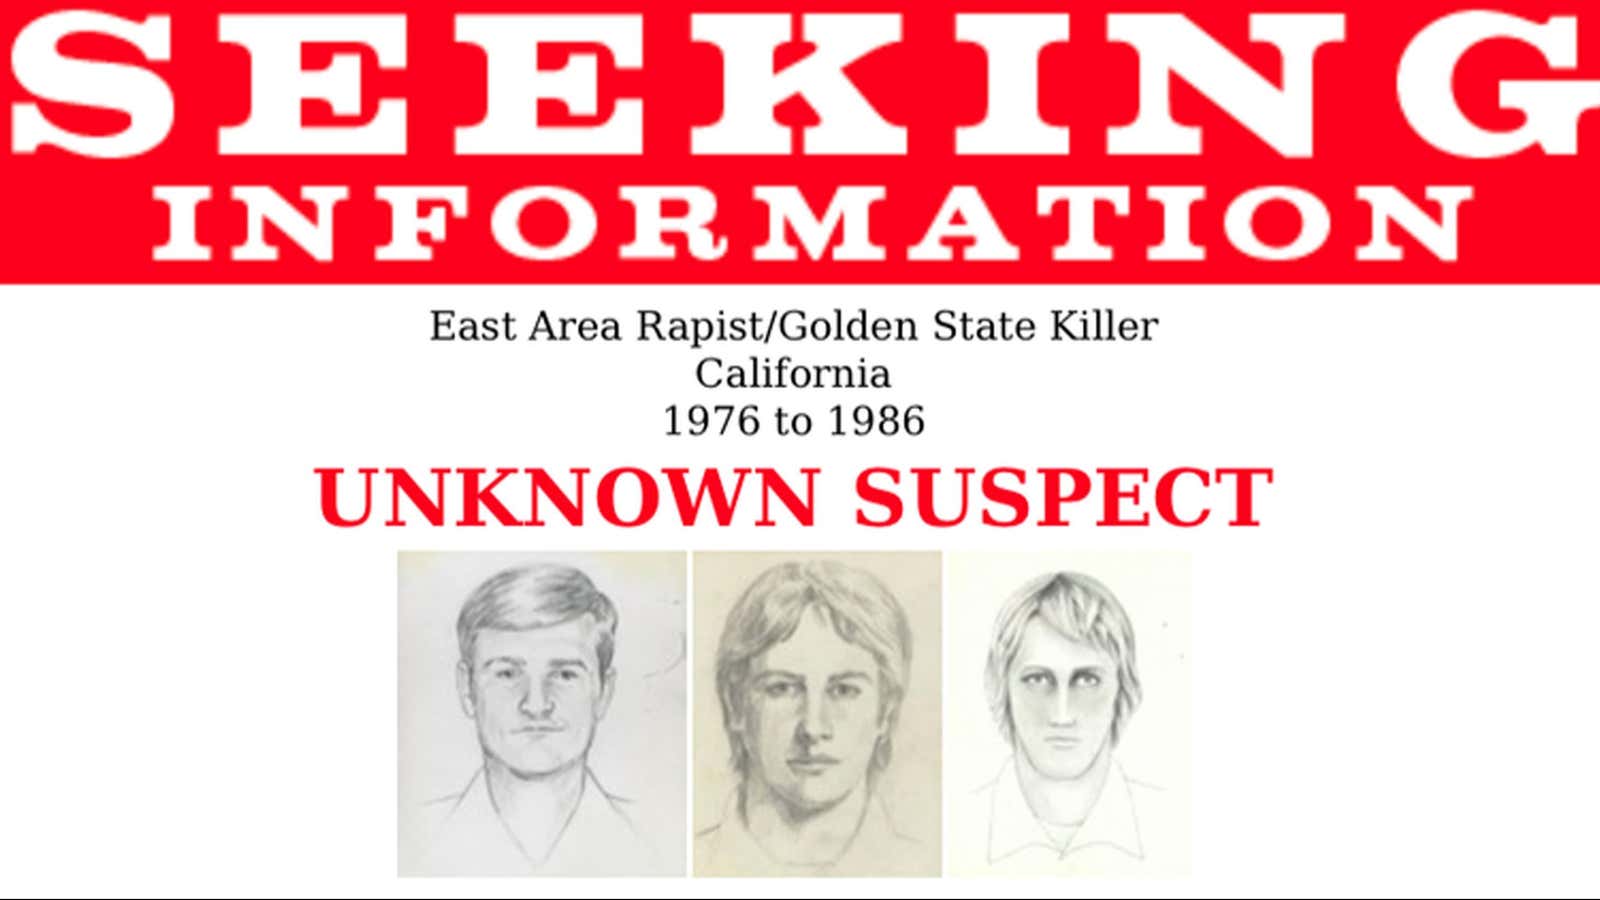 The “Golden State Killer” had a typical “male” m.o.